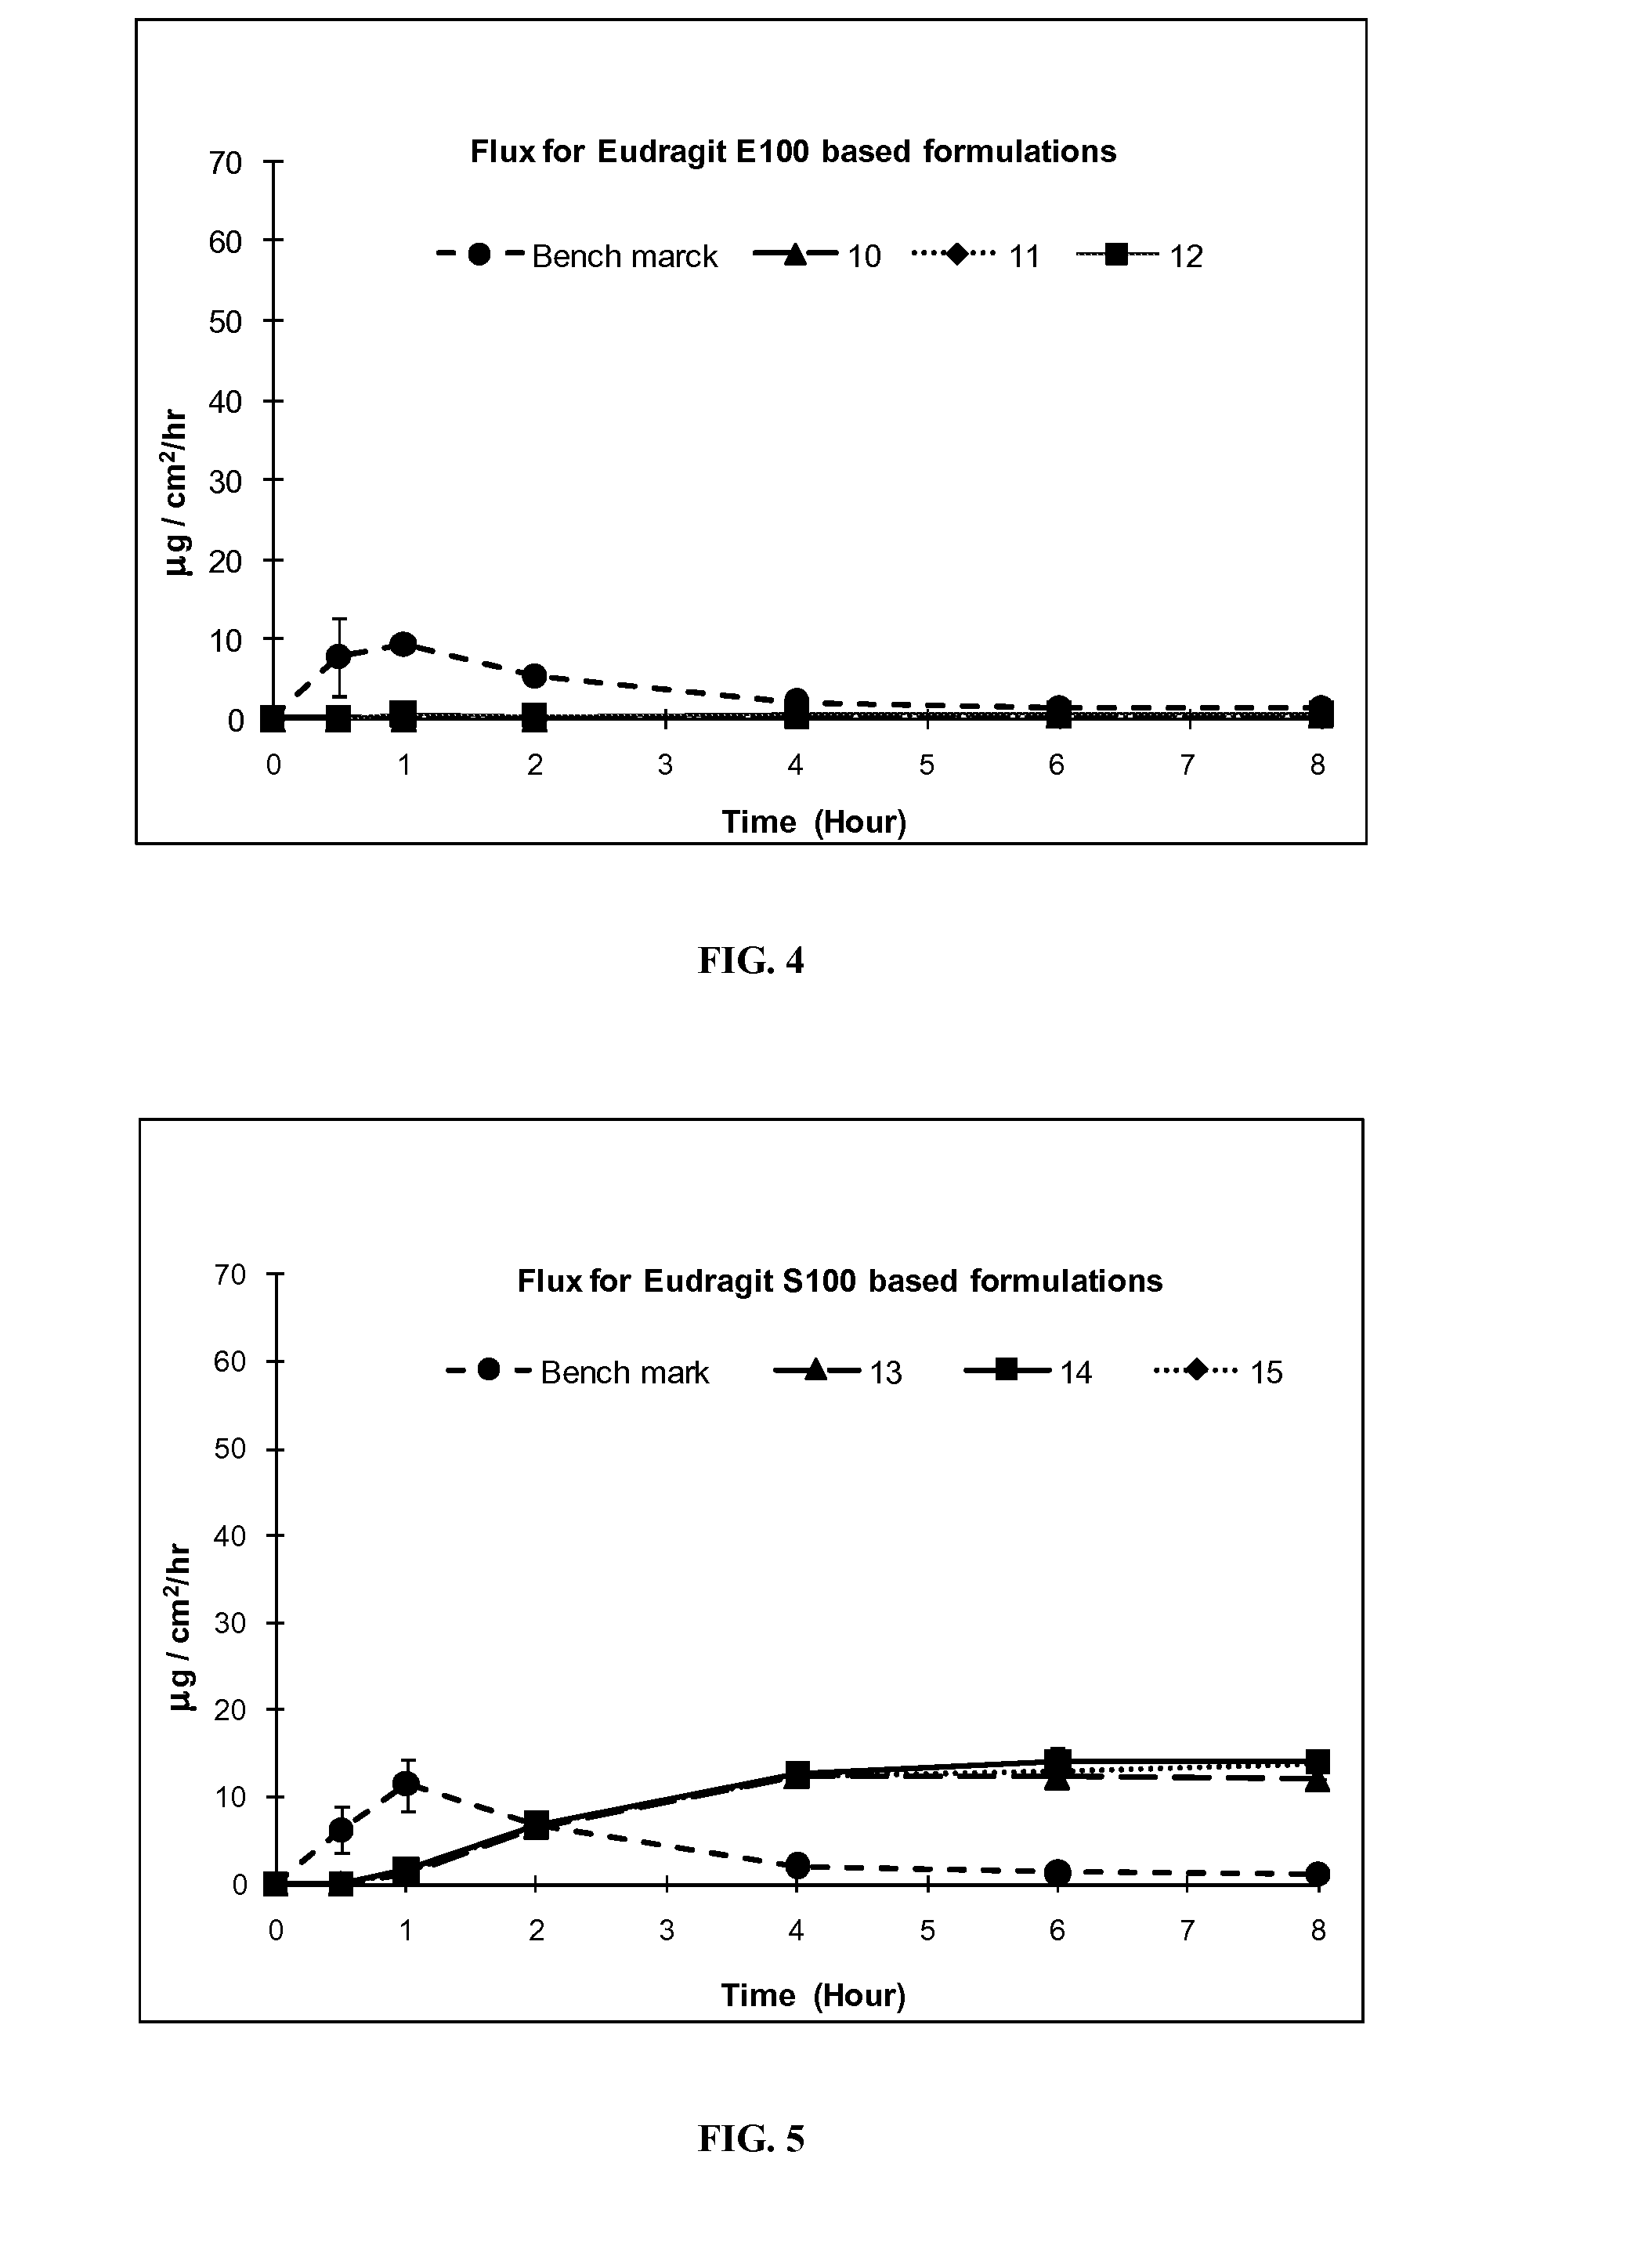 Topical Formulation Compositions Containing Silicone Based Excipients To Deliver Actives To A Substrate